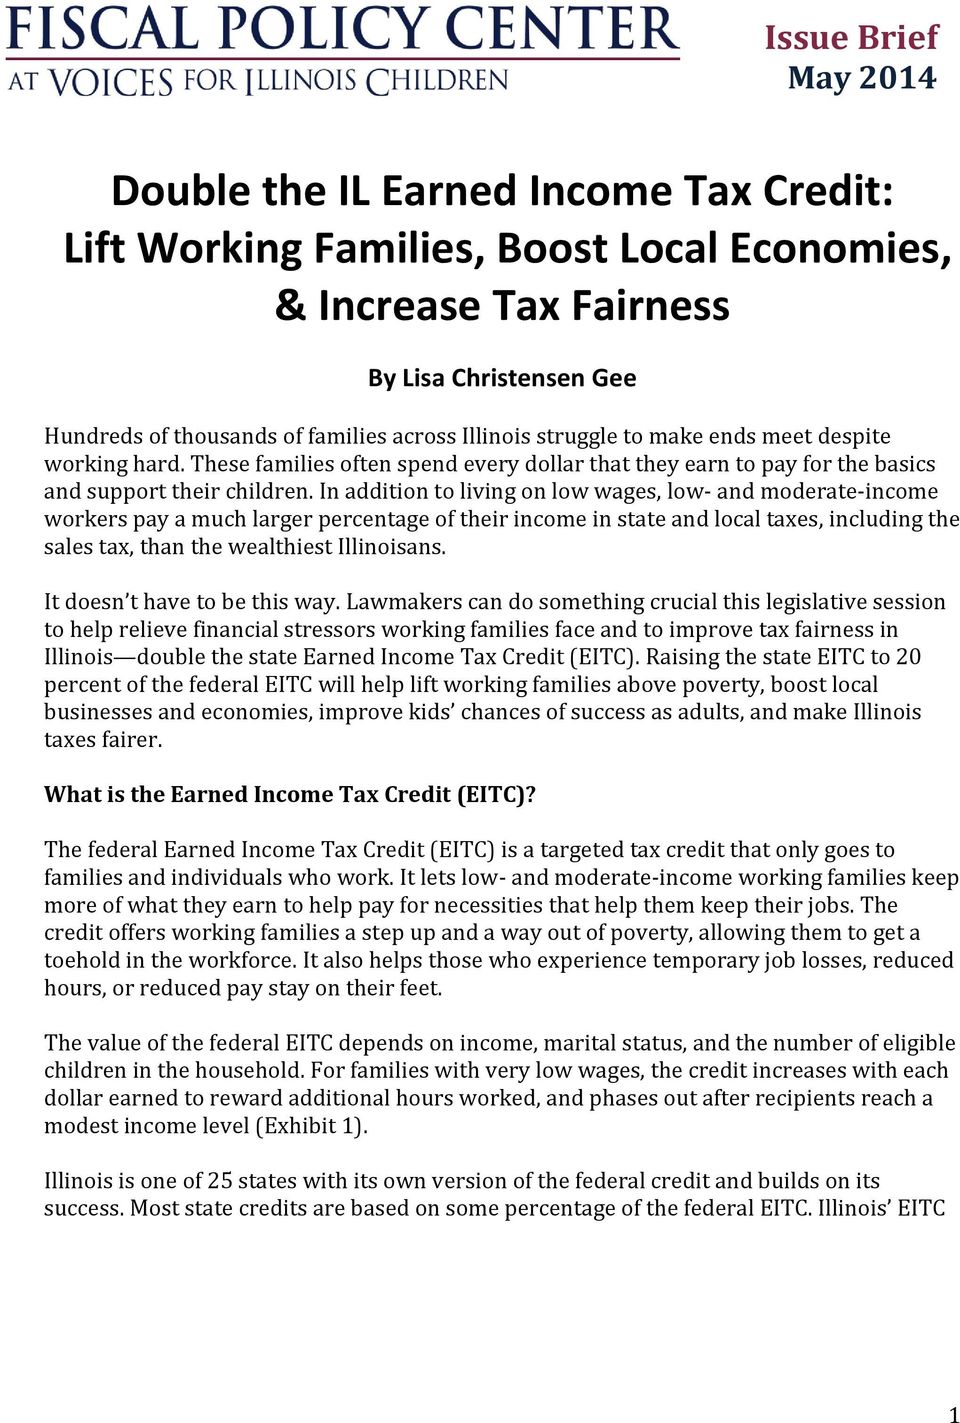 In addition to living on low wages, low- and moderate-income workers pay a much larger percentage of their income in state and local taxes, including the sales tax, than the wealthiest Illinoisans.